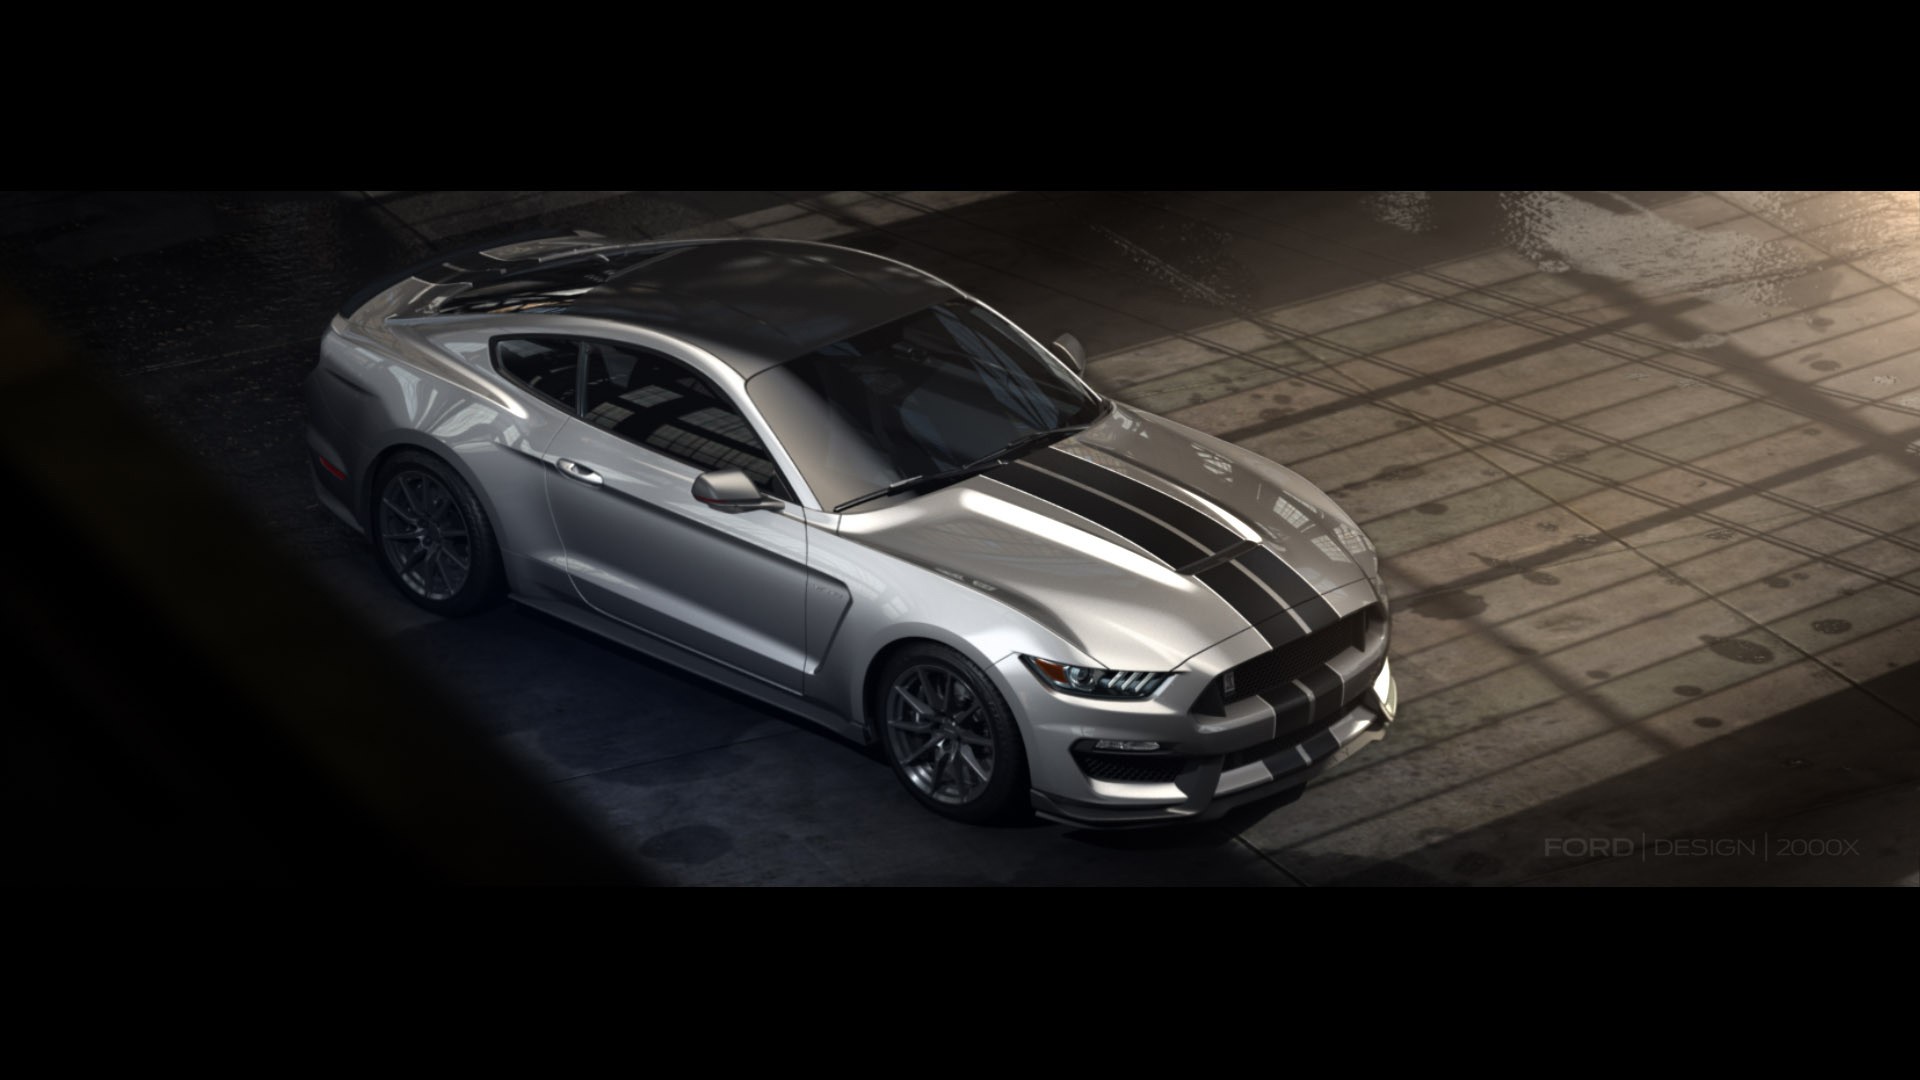 Car Ford Mustang Shelby Shelby GT 350 1920x1080